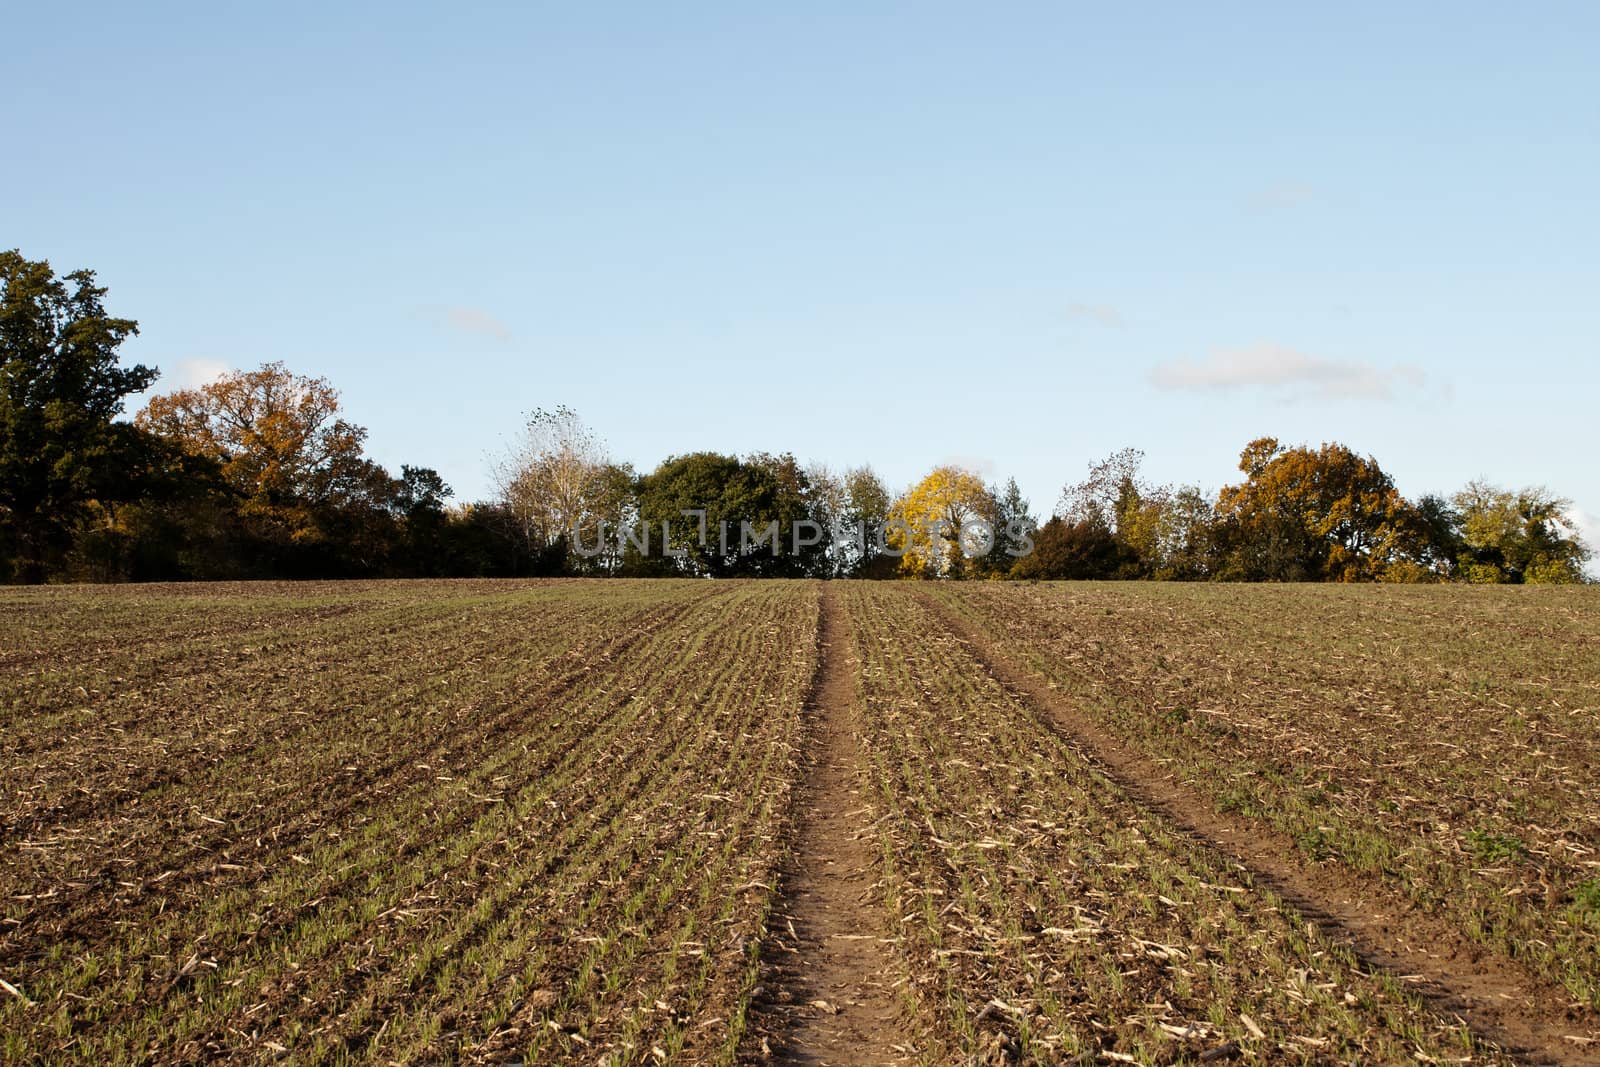 Farmland with new crops growing, edged by autumnal trees